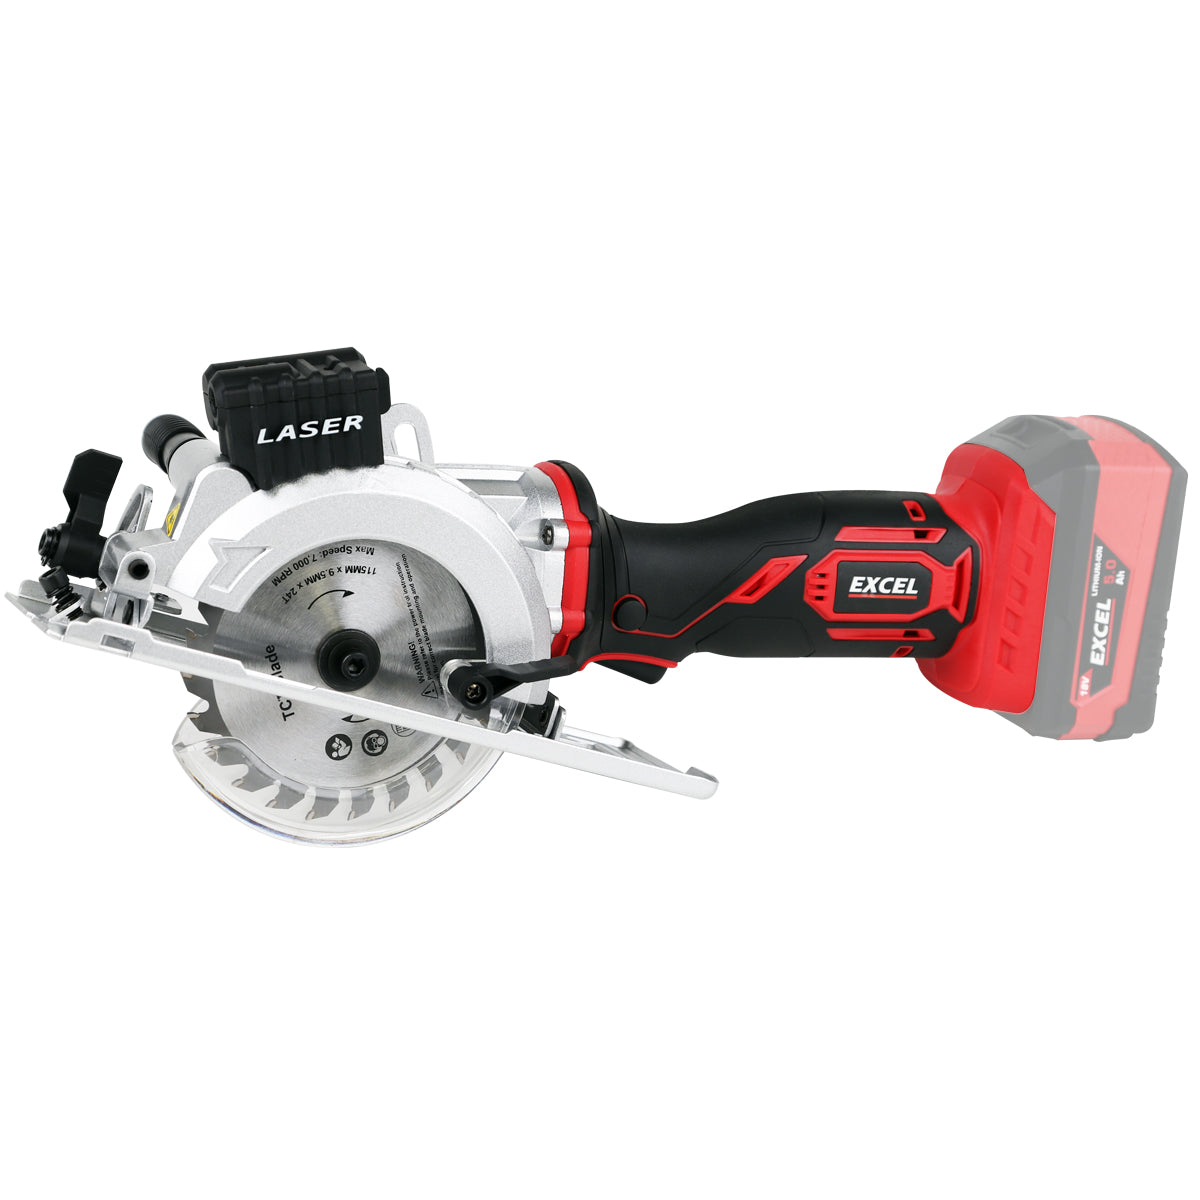 Excel 18V 115mm Mini Circular Saw with 2 x 2.0Ah Battery & Charger